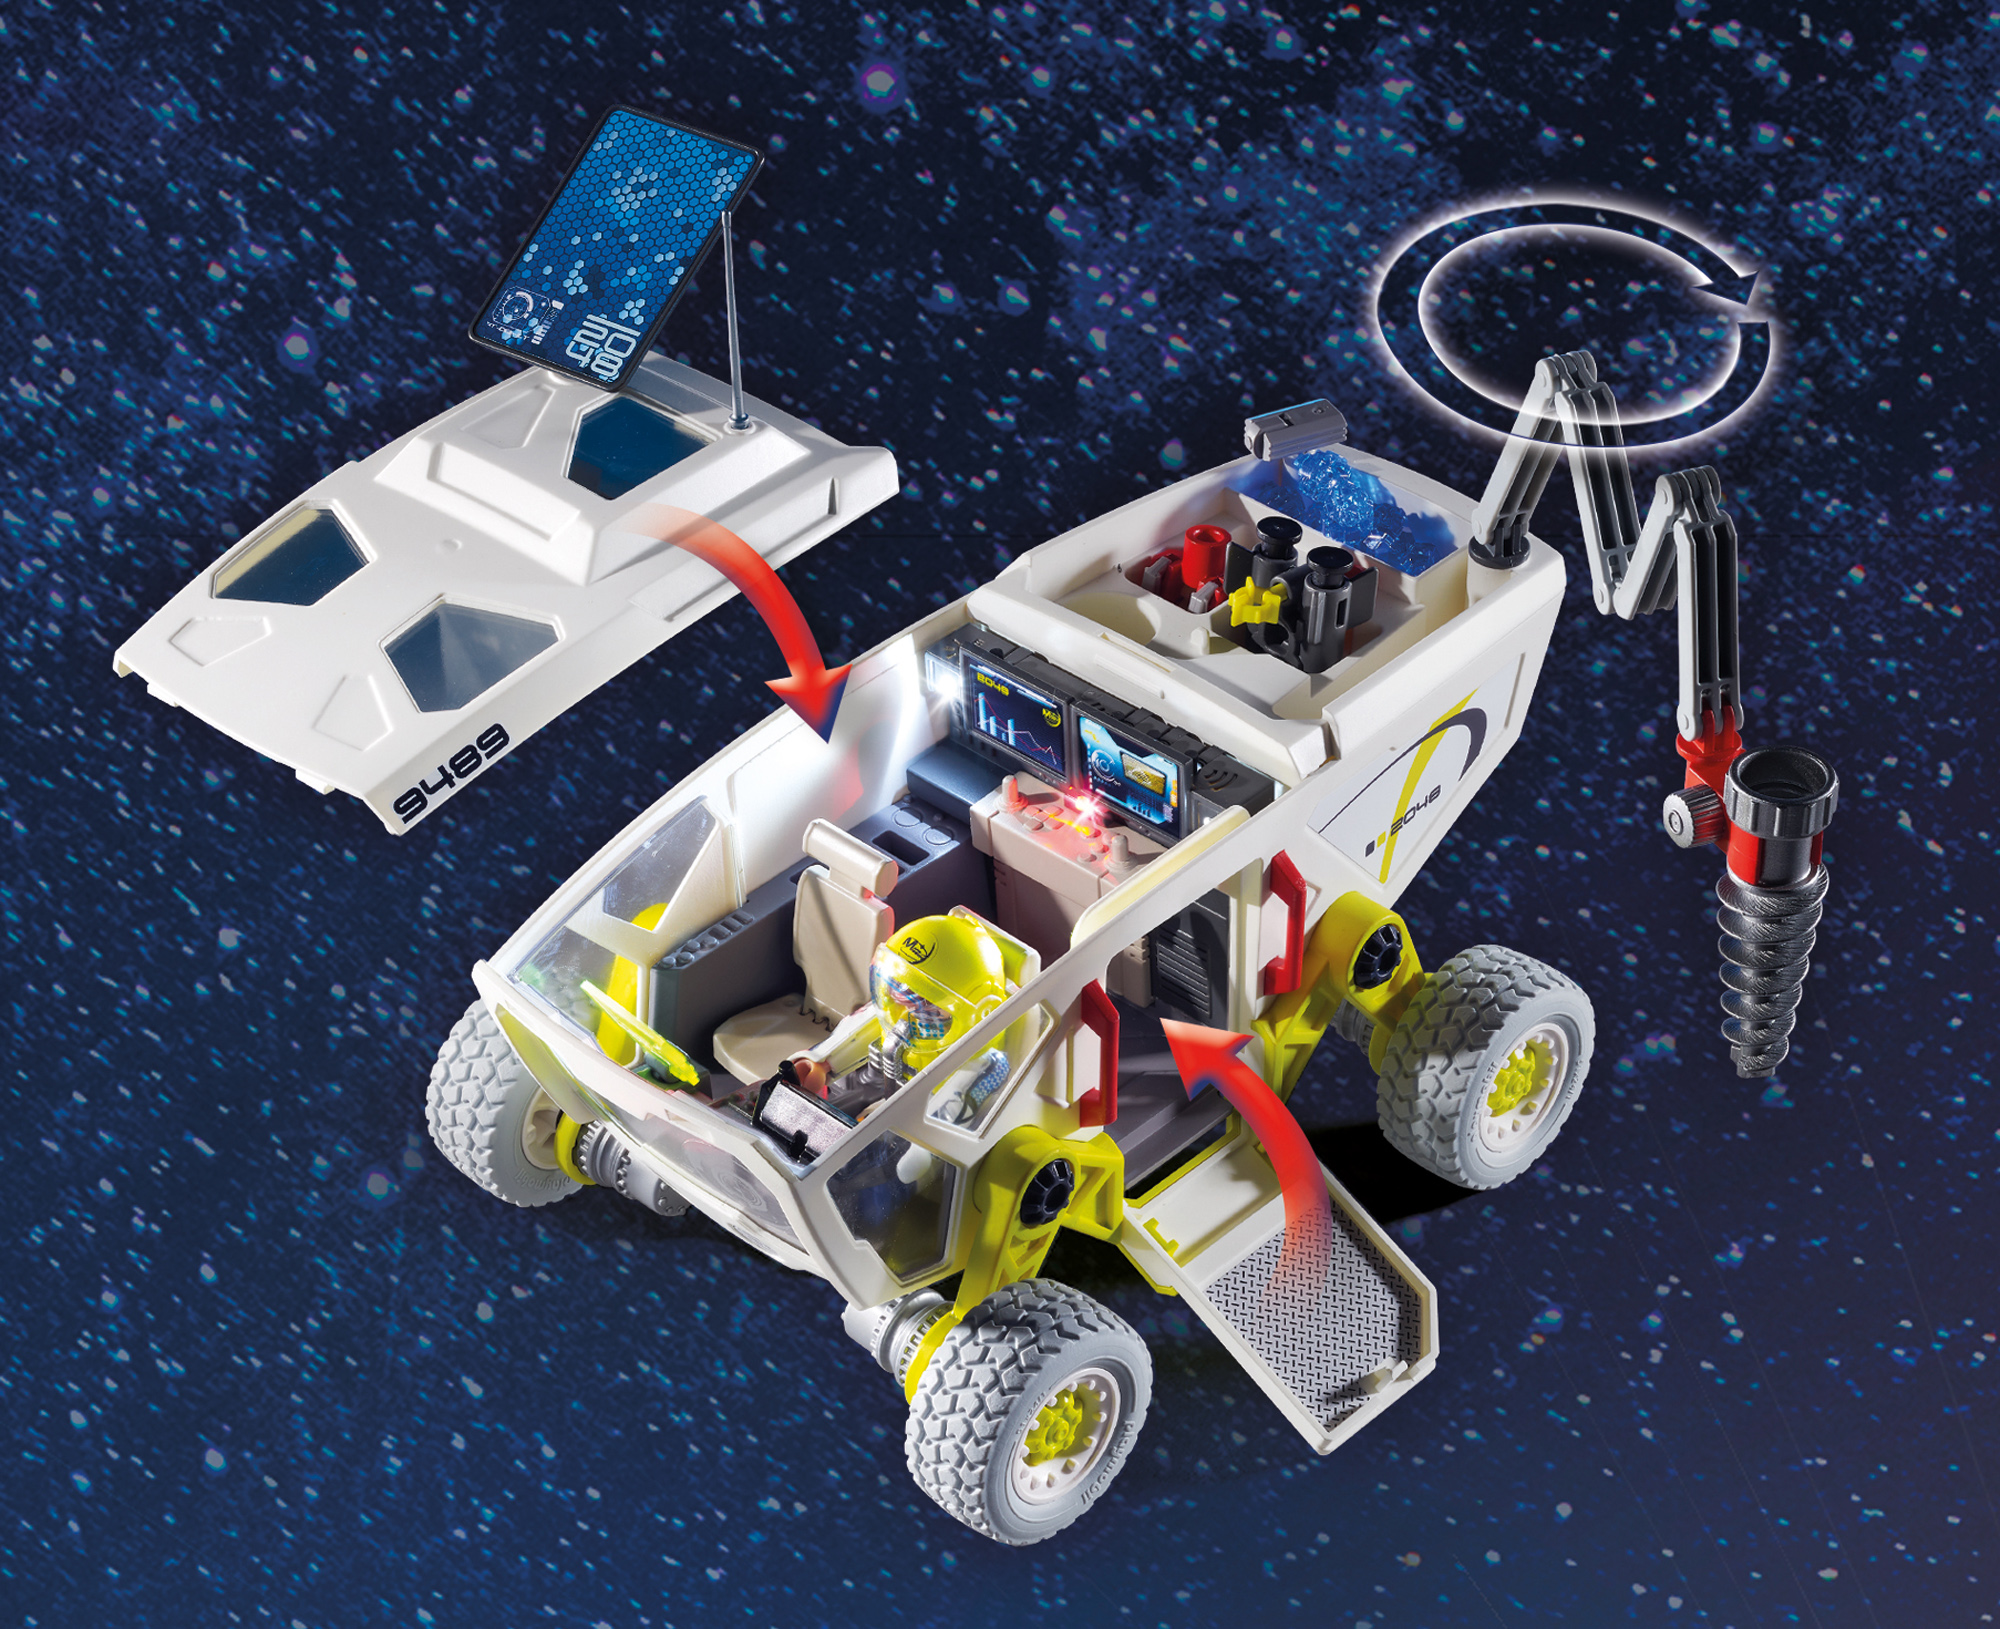 PLAYMOBIL Mars Research Vehicle - image 5 of 7